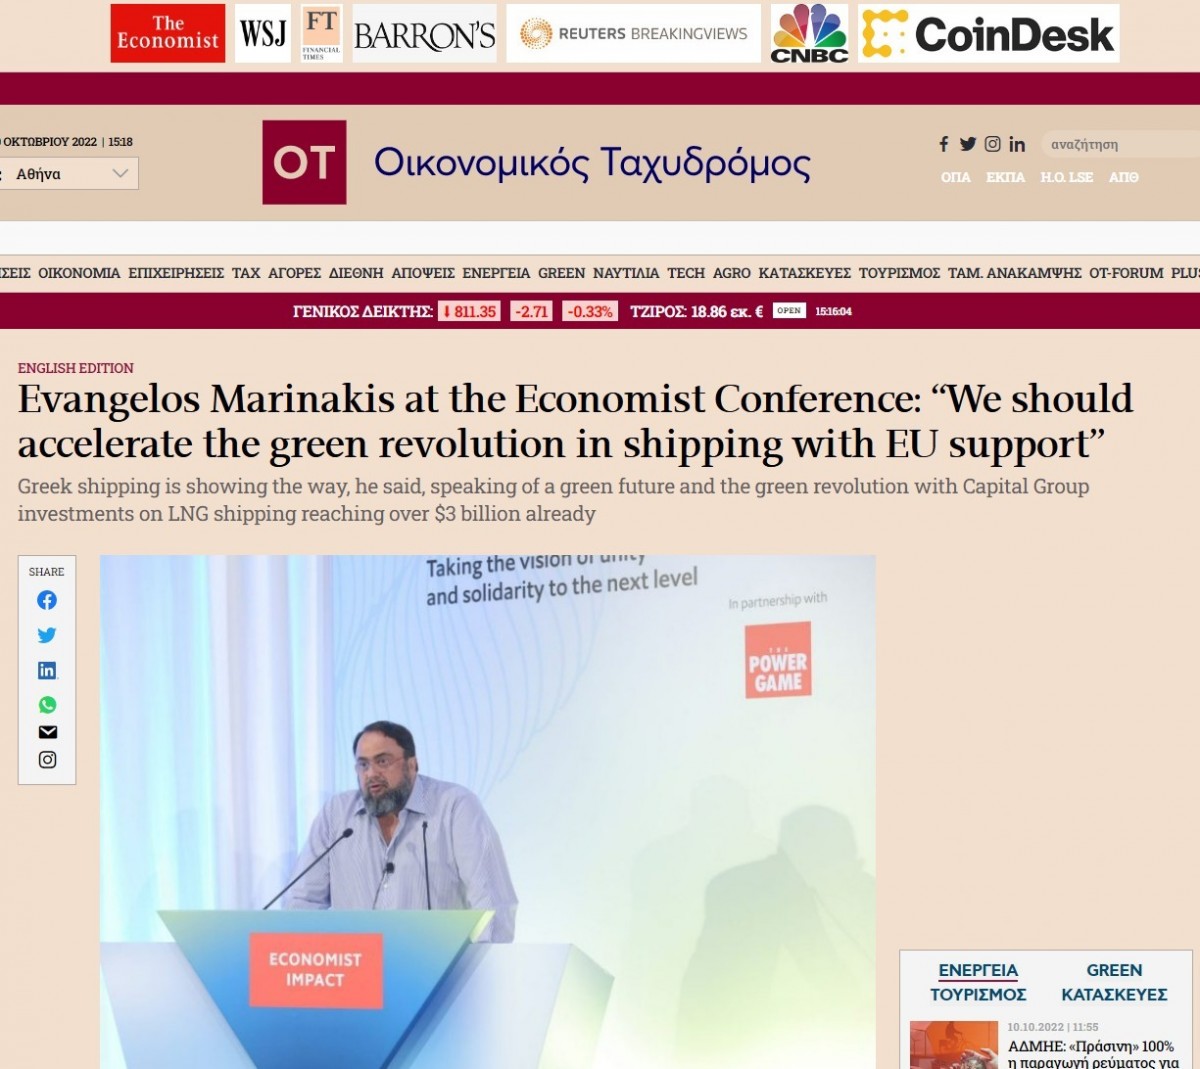 Evangelos Marinakis at the Economist Conference: “We should accelerate the green revolution in shipping with EU support”